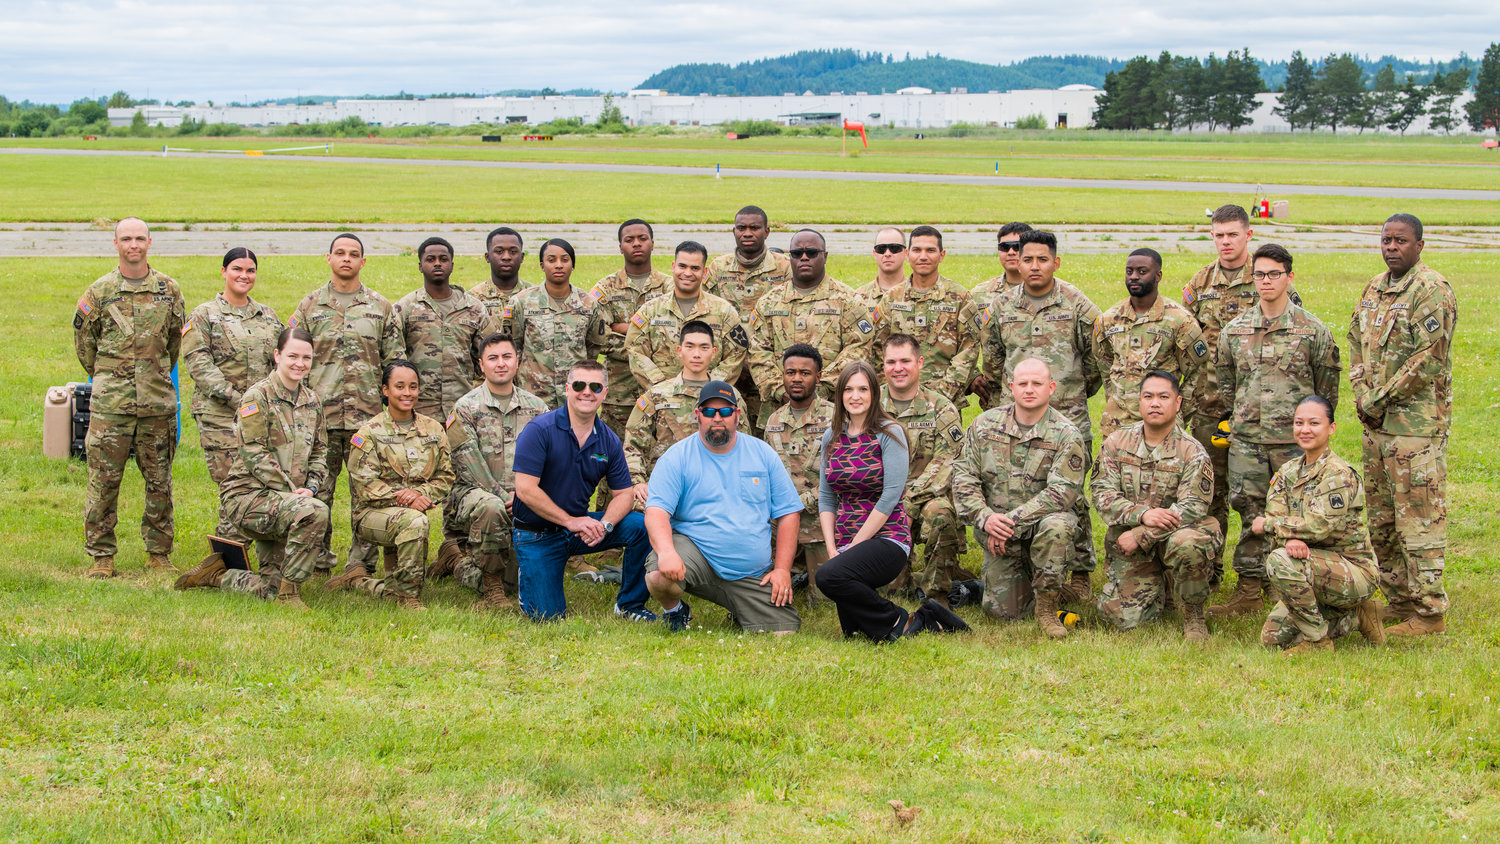 Staff from the Chehalis-Centralia Airport pose for a photo with members of the United States Army and Air Force from Joint Base Lewis-McChord during a military training exercise Wednesday in Chehalis.